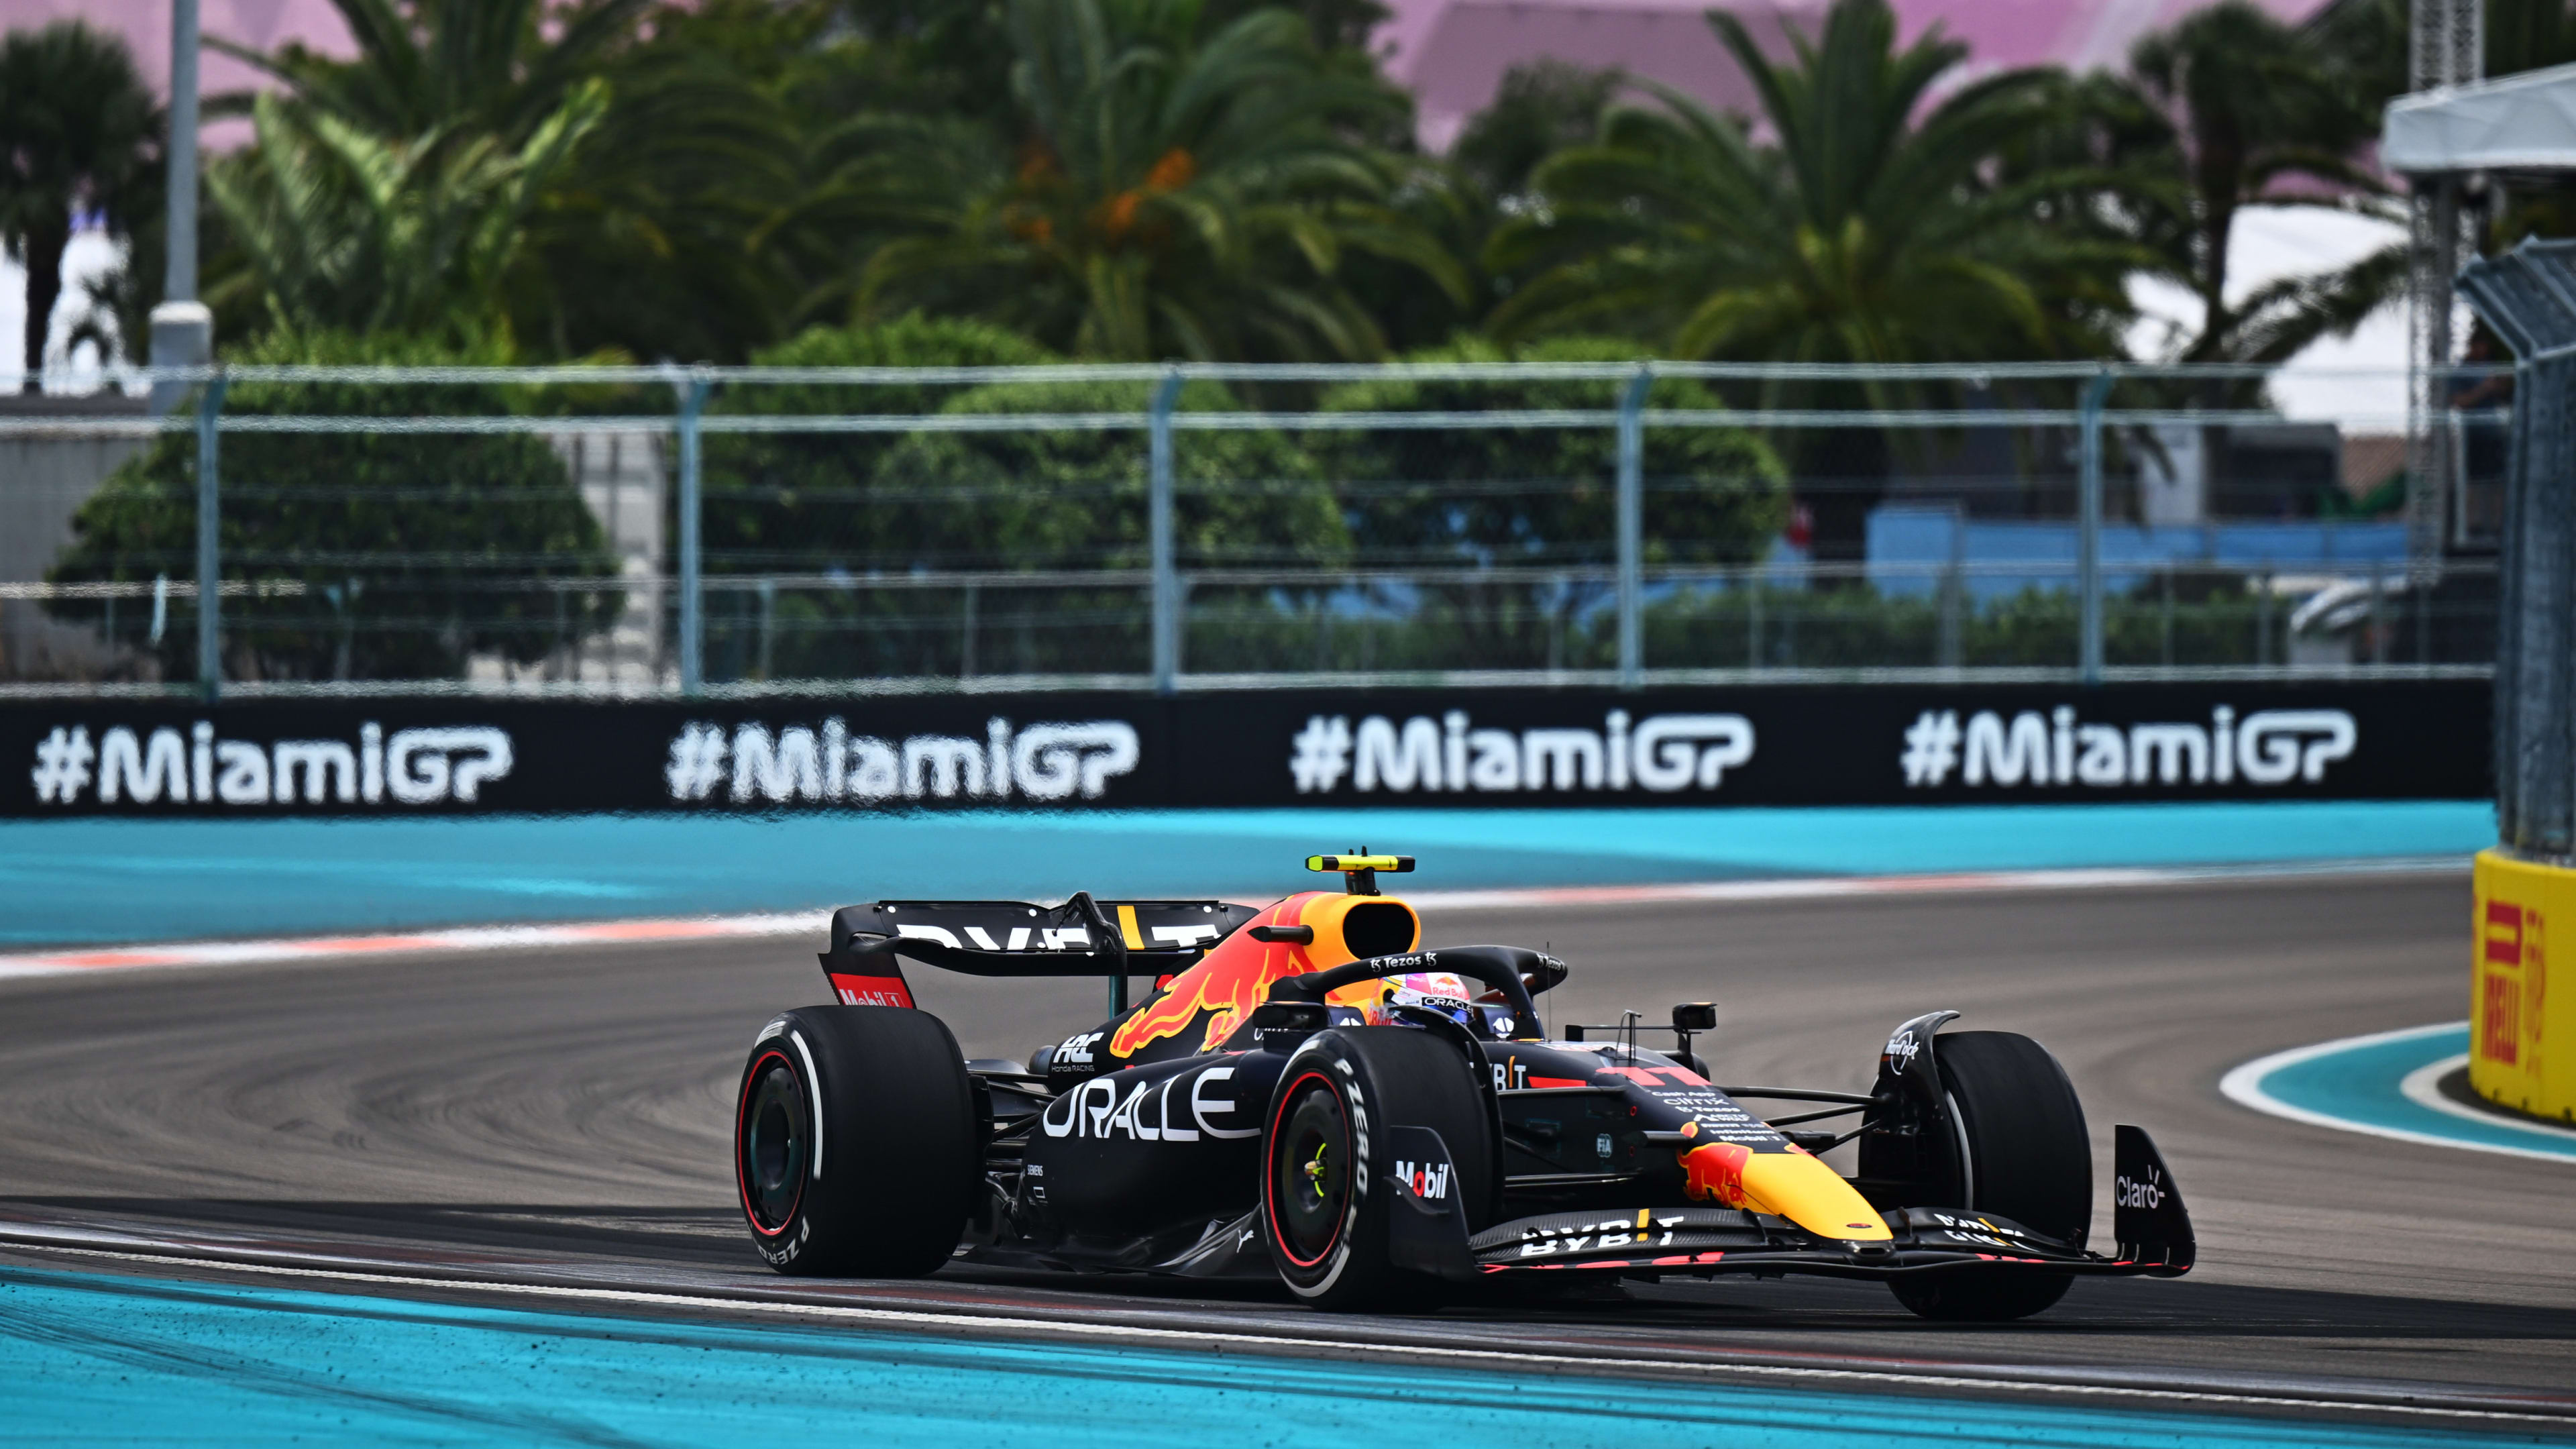 2022 Miami Grand Prix FP3 report and highlights Perez leads Leclerc and Verstappen in final Miami GP practice Formula 1®